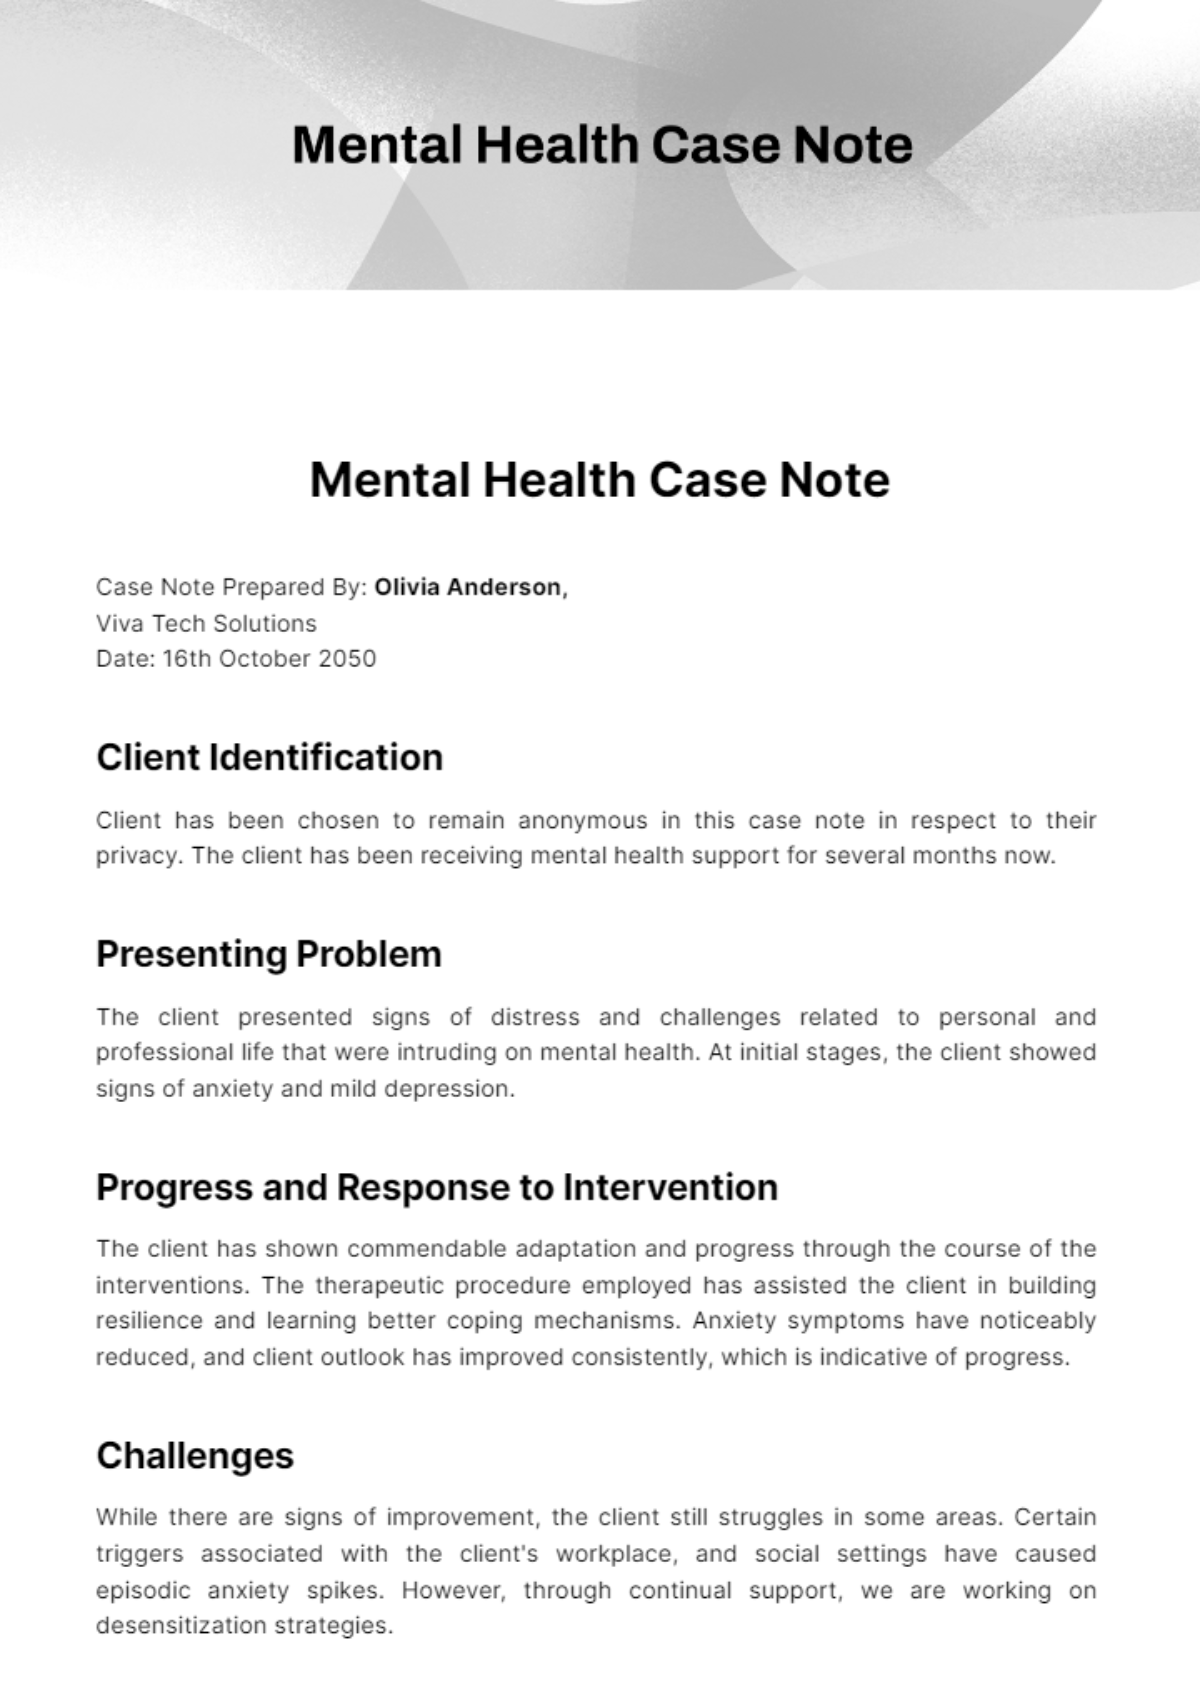 Free Mental Health Case Note Template